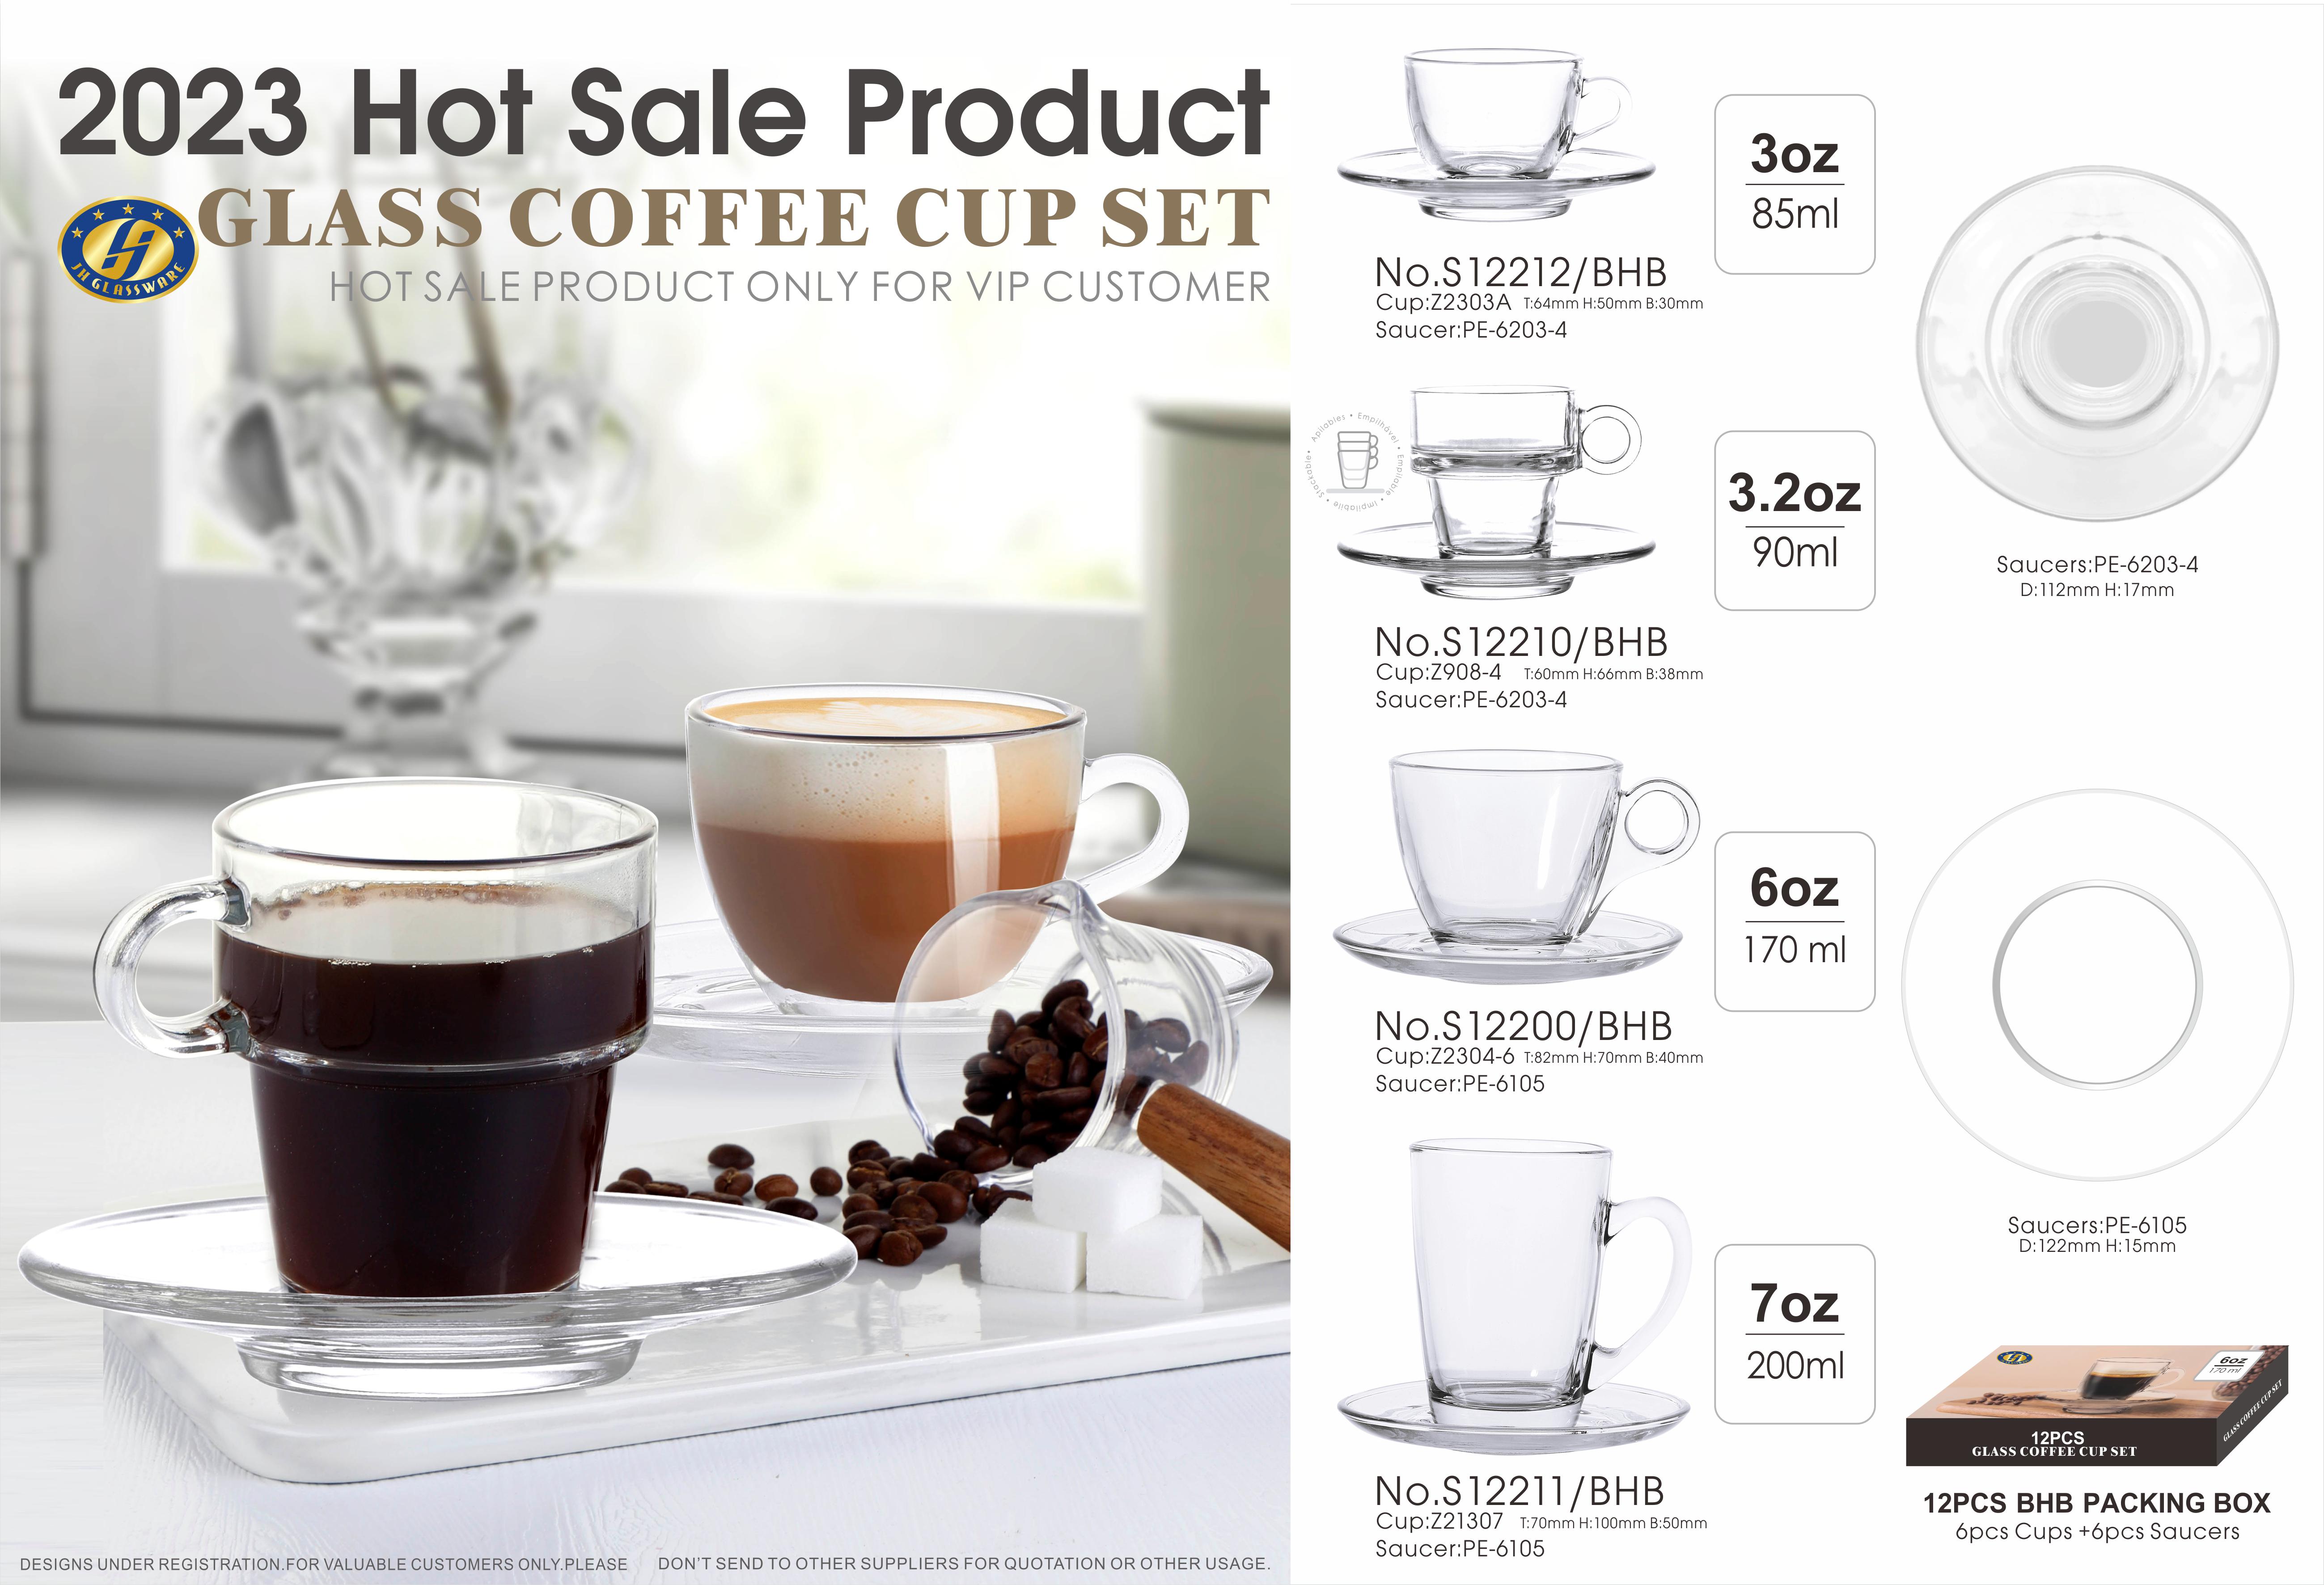 2023 Hot Sale Product Glass Coffee Cup Set